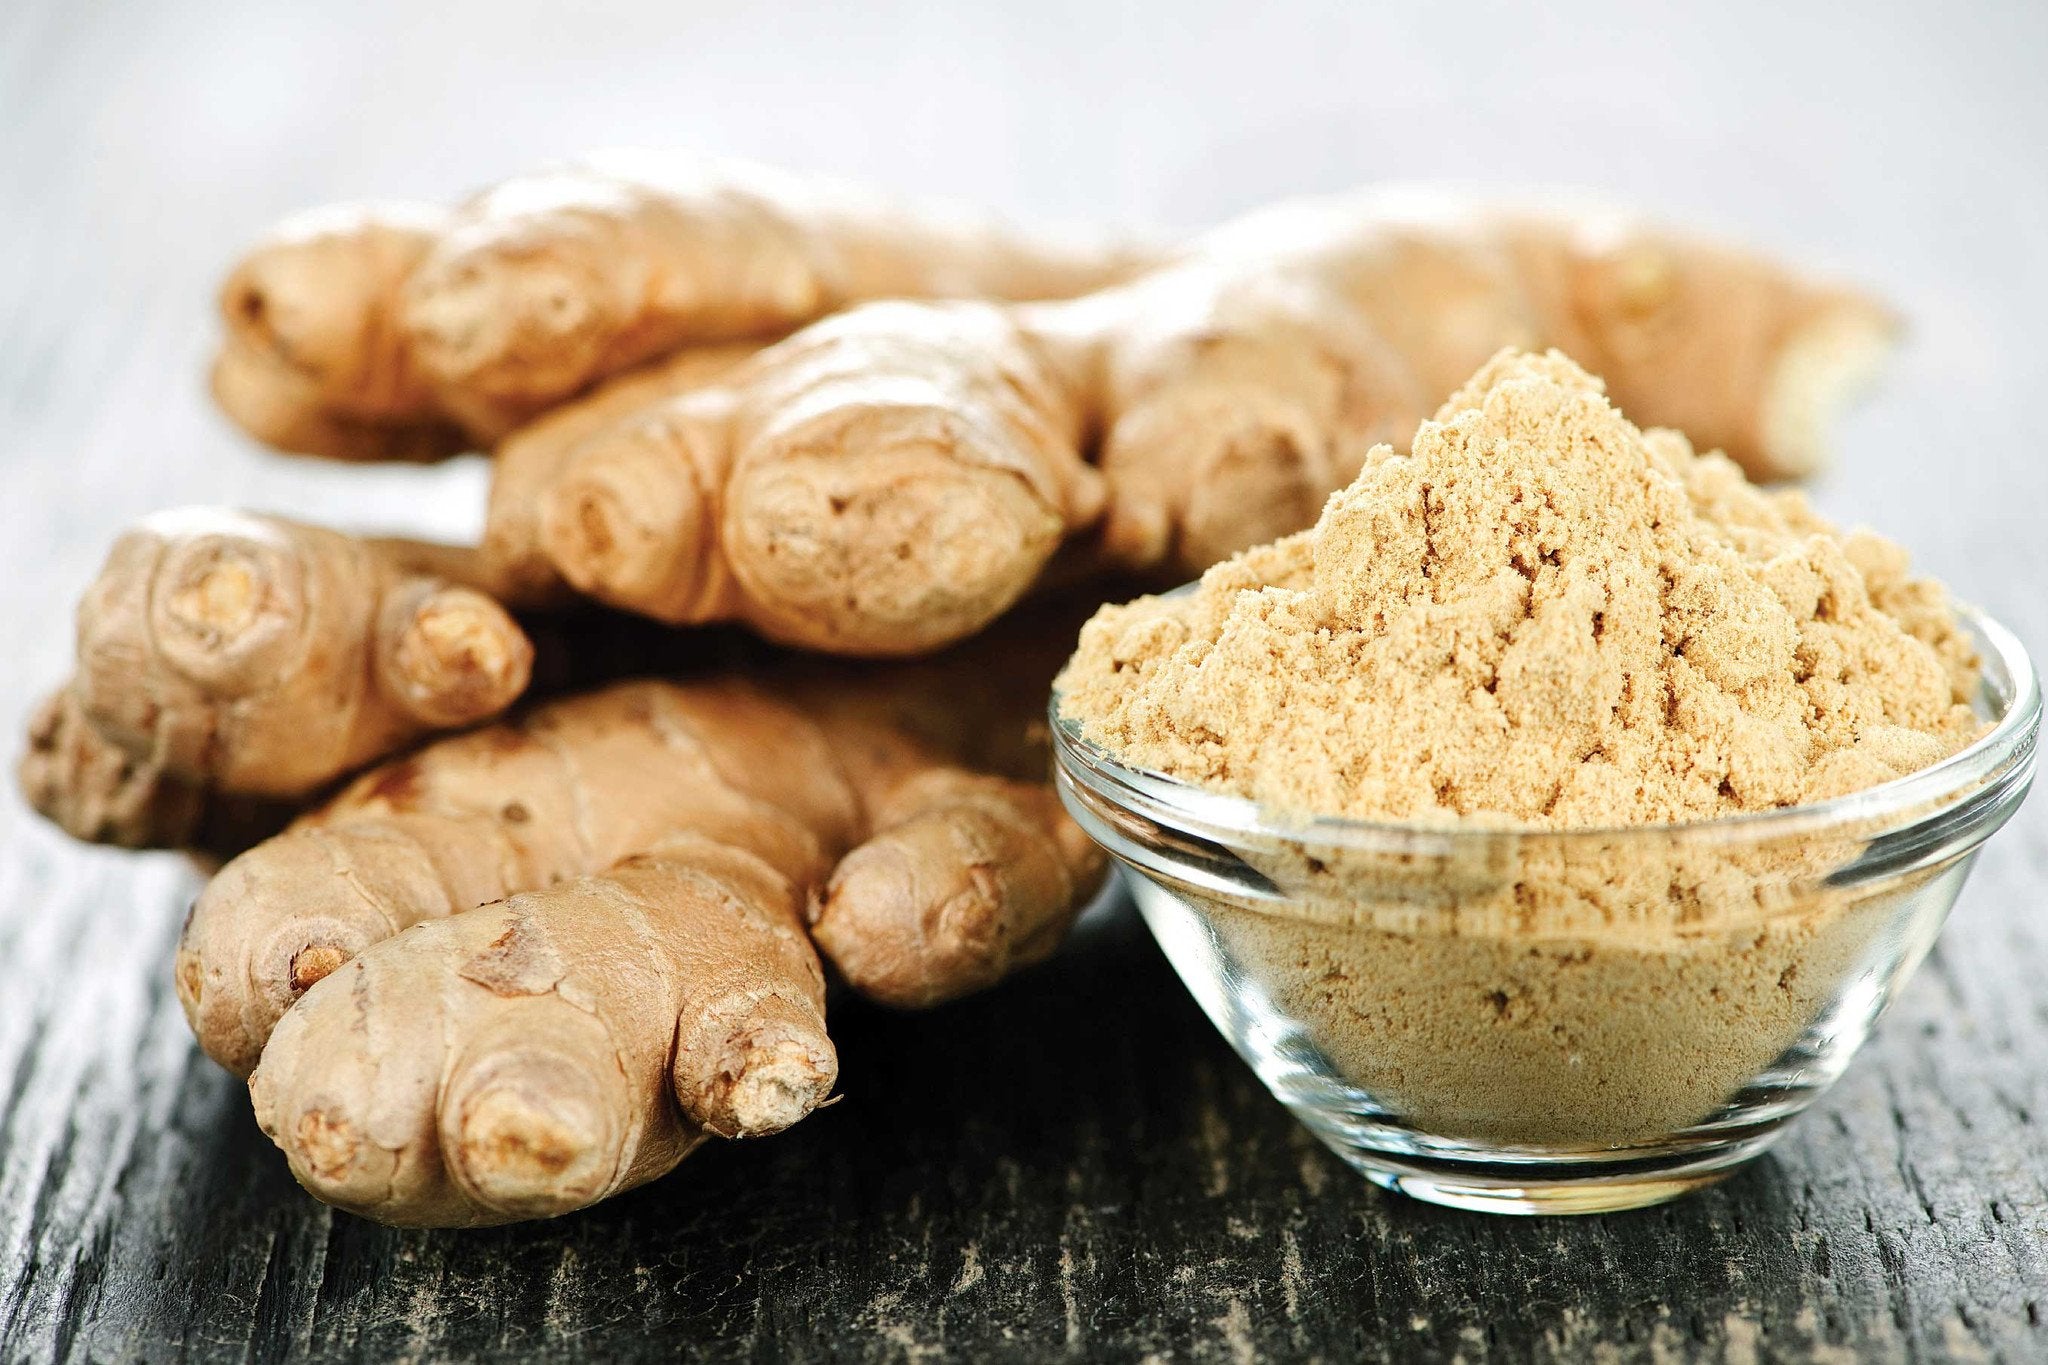 Organic Ginger Powder - Zingiber Officinalis - Ginger is traditionally used in herbal medicines to help relieve digestive upset including lack of appetite, nausea, digestive spasms, indigestion, dyspepsia, and flatulent colic (carminative), as an expectorant and cough suppressant (antitussive) to help relieve bronchitis as well as coughs and colds.